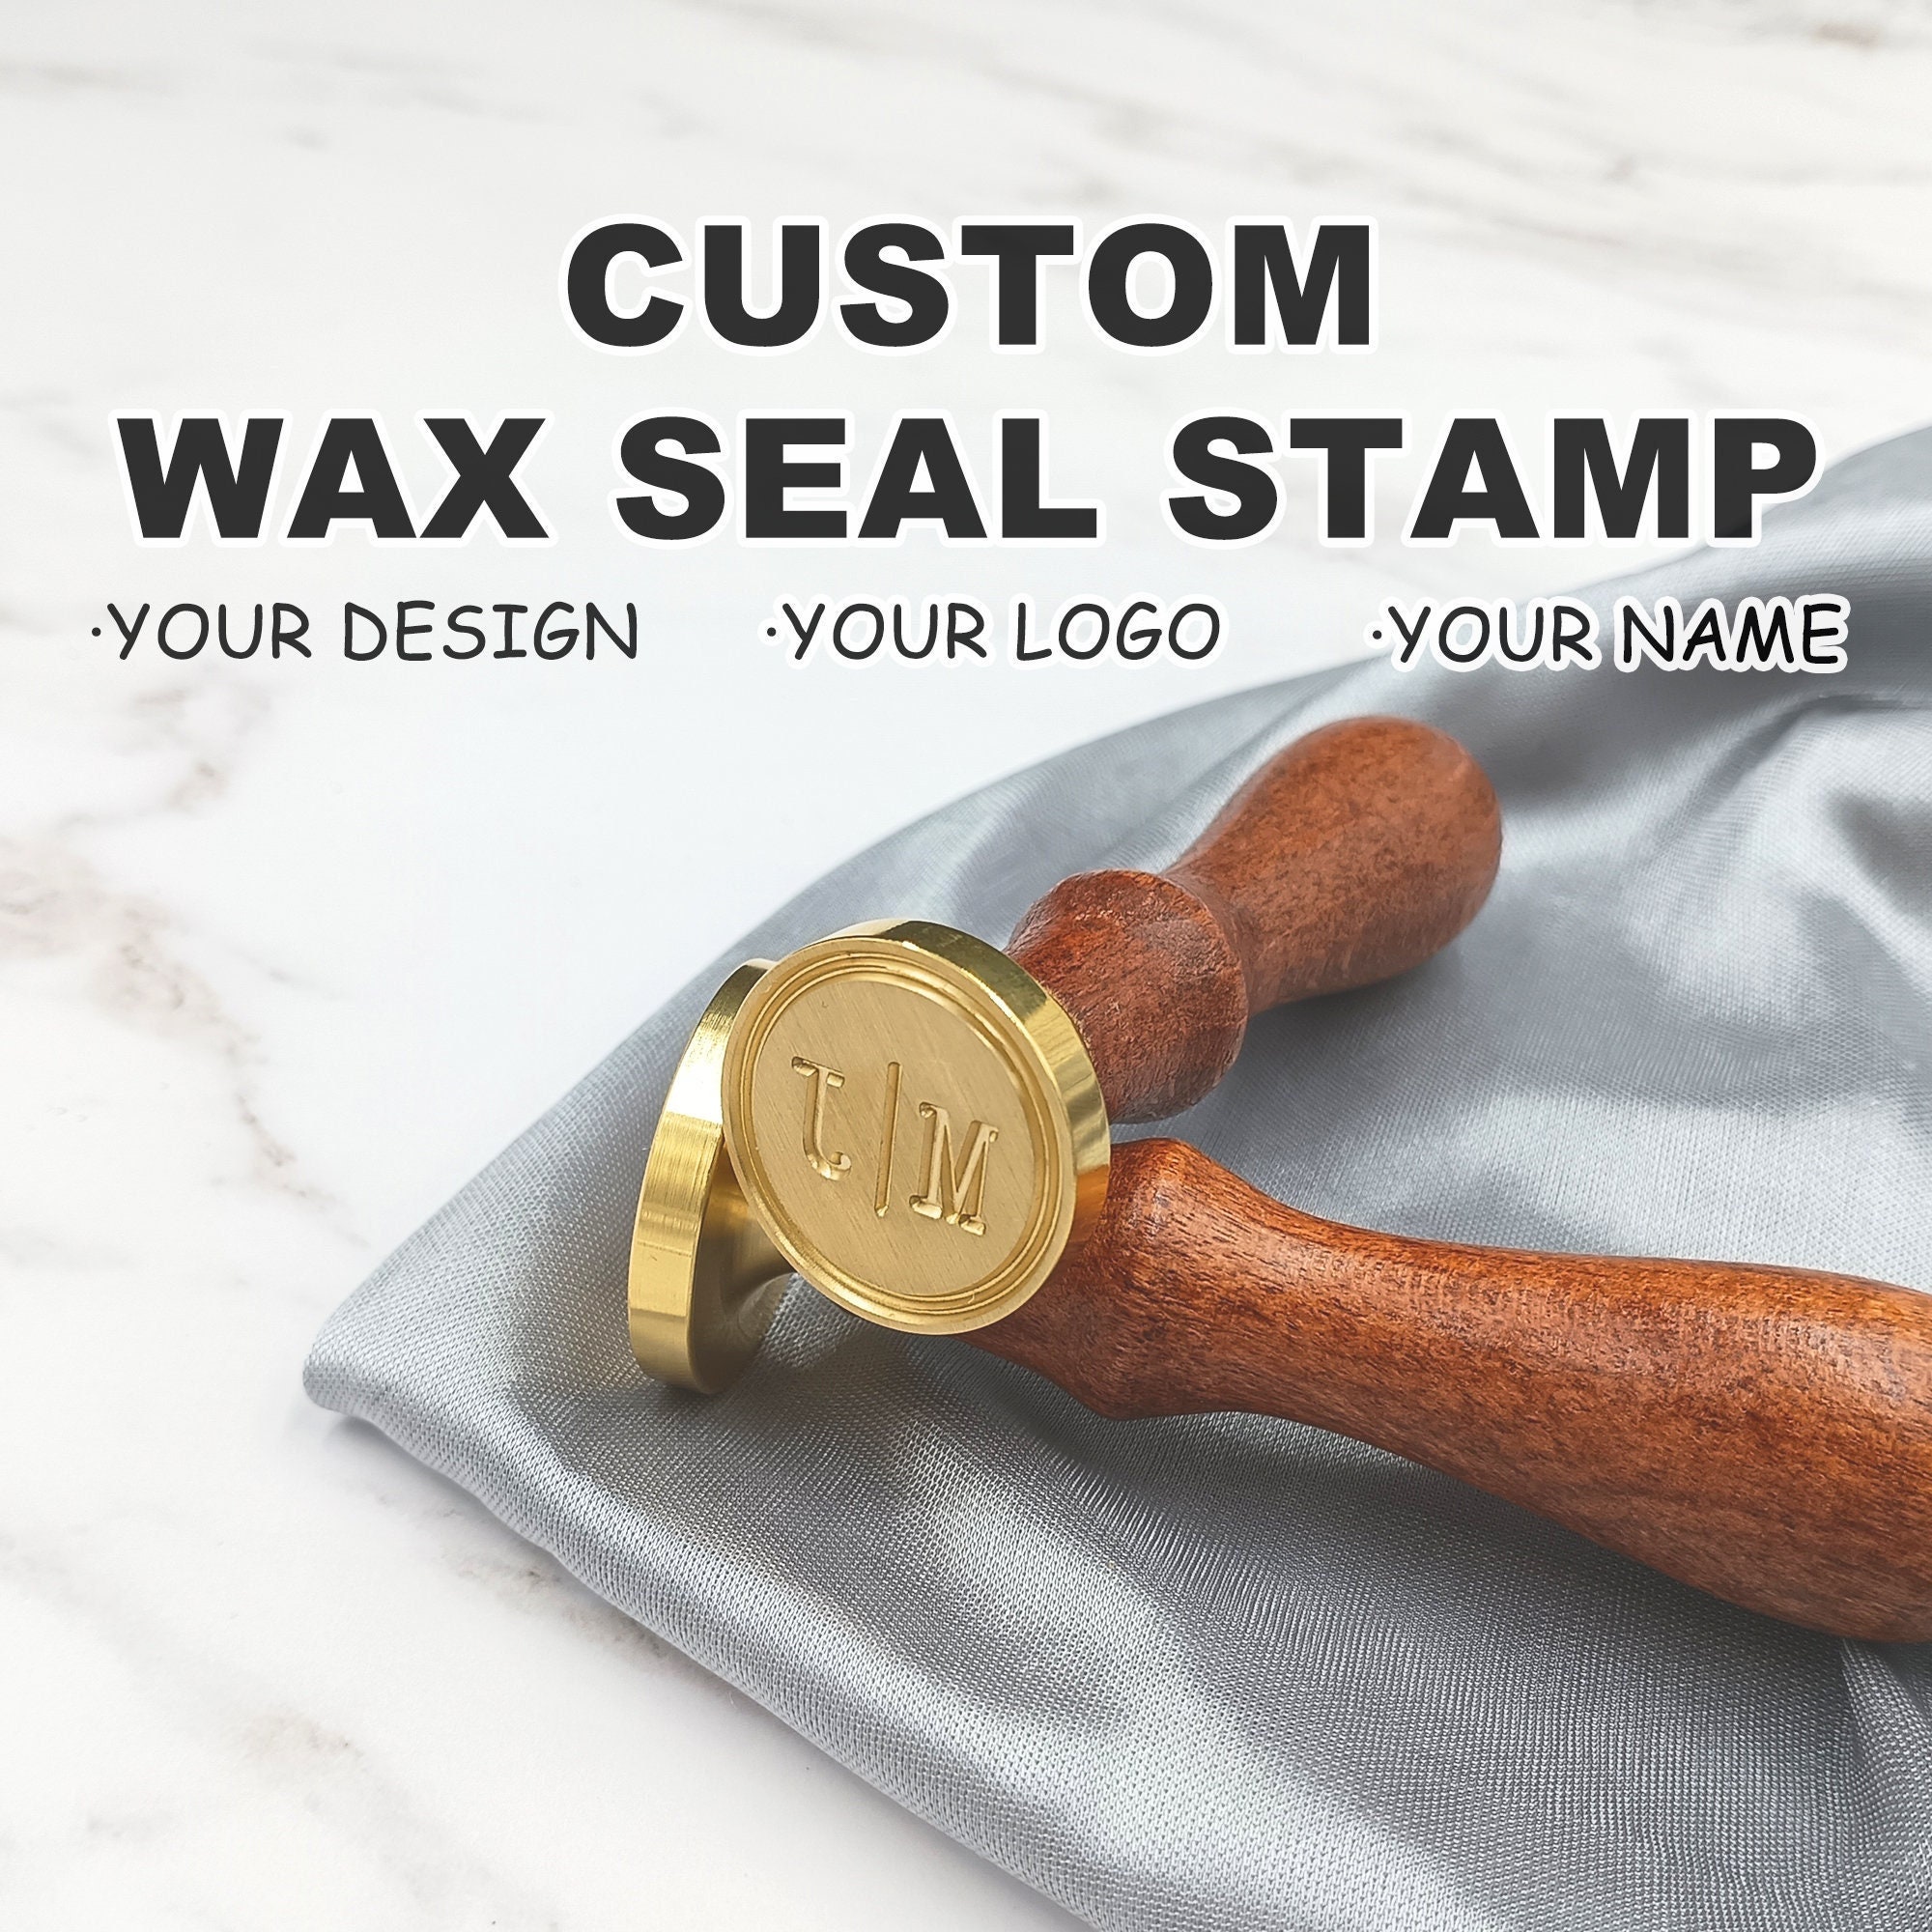 Ghost Wax Seal Stamp Custom Sealing Wax Stamp Kit Personalized Gifts :  VEASOON